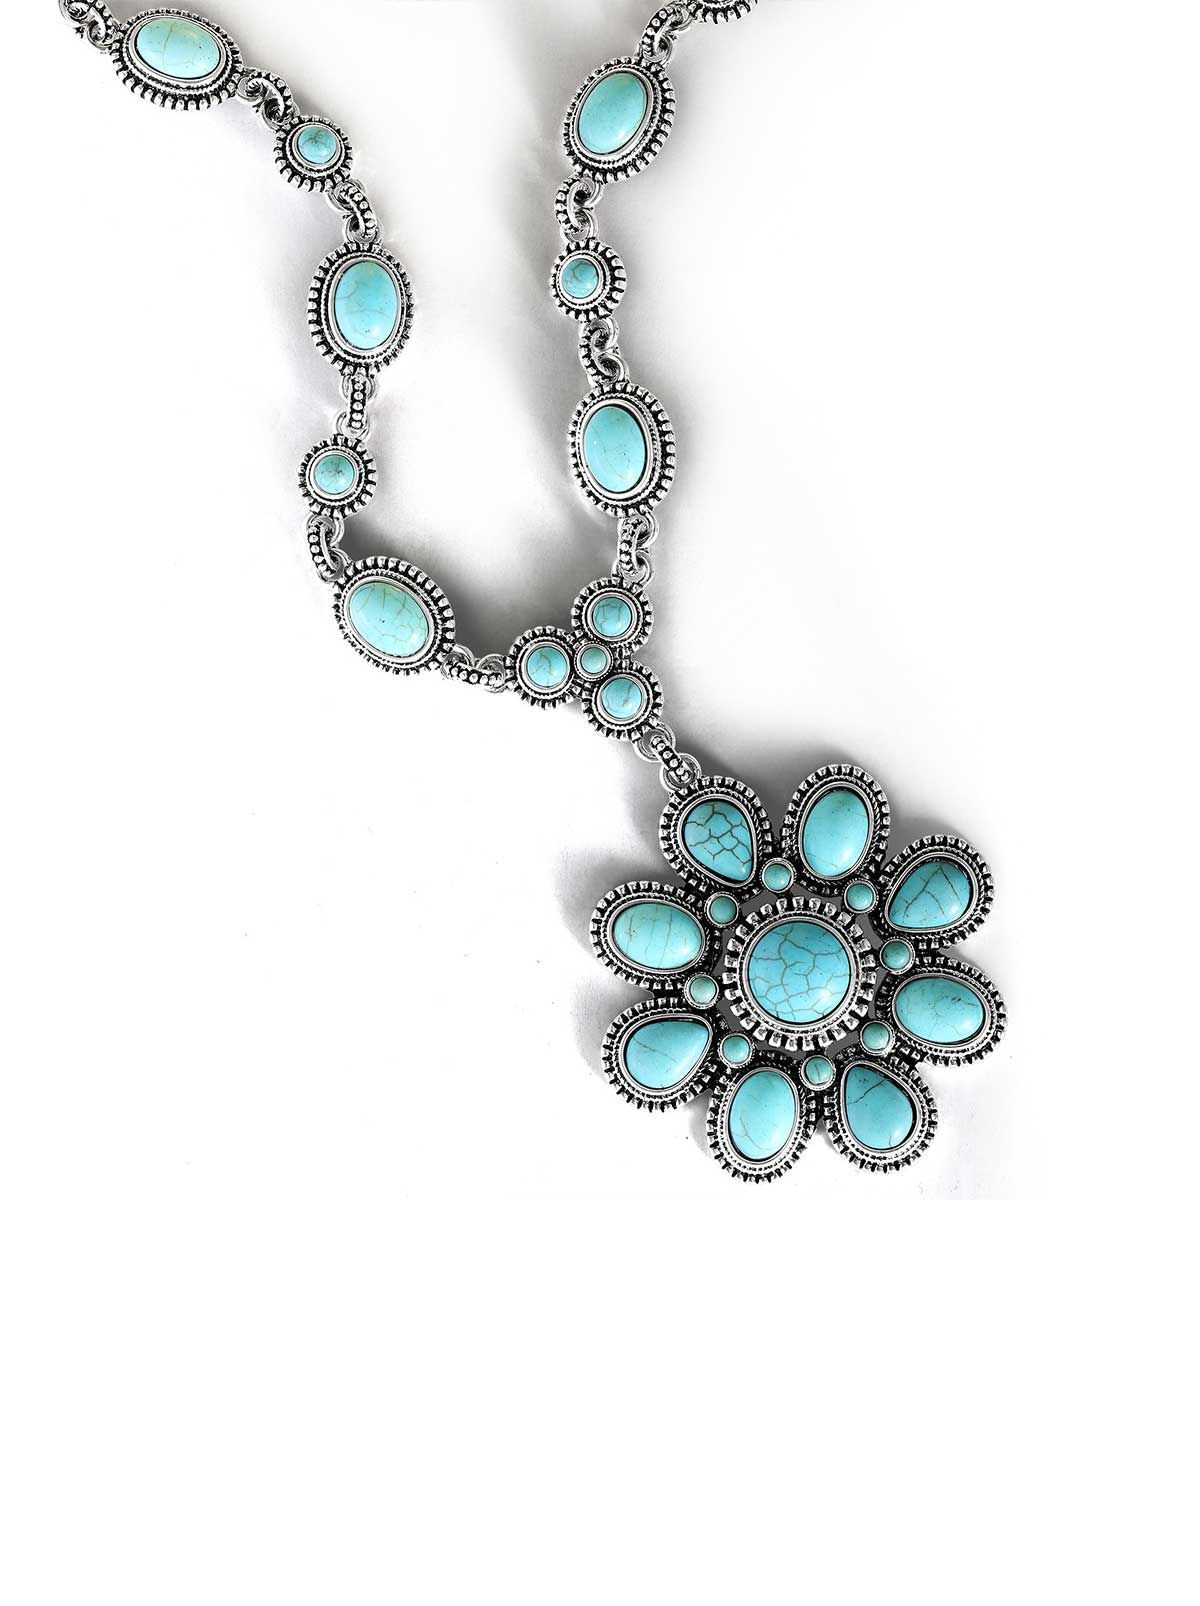 Large Turquoise Stone Flower Necklace in Silver | Jessica Simpson E Commerce